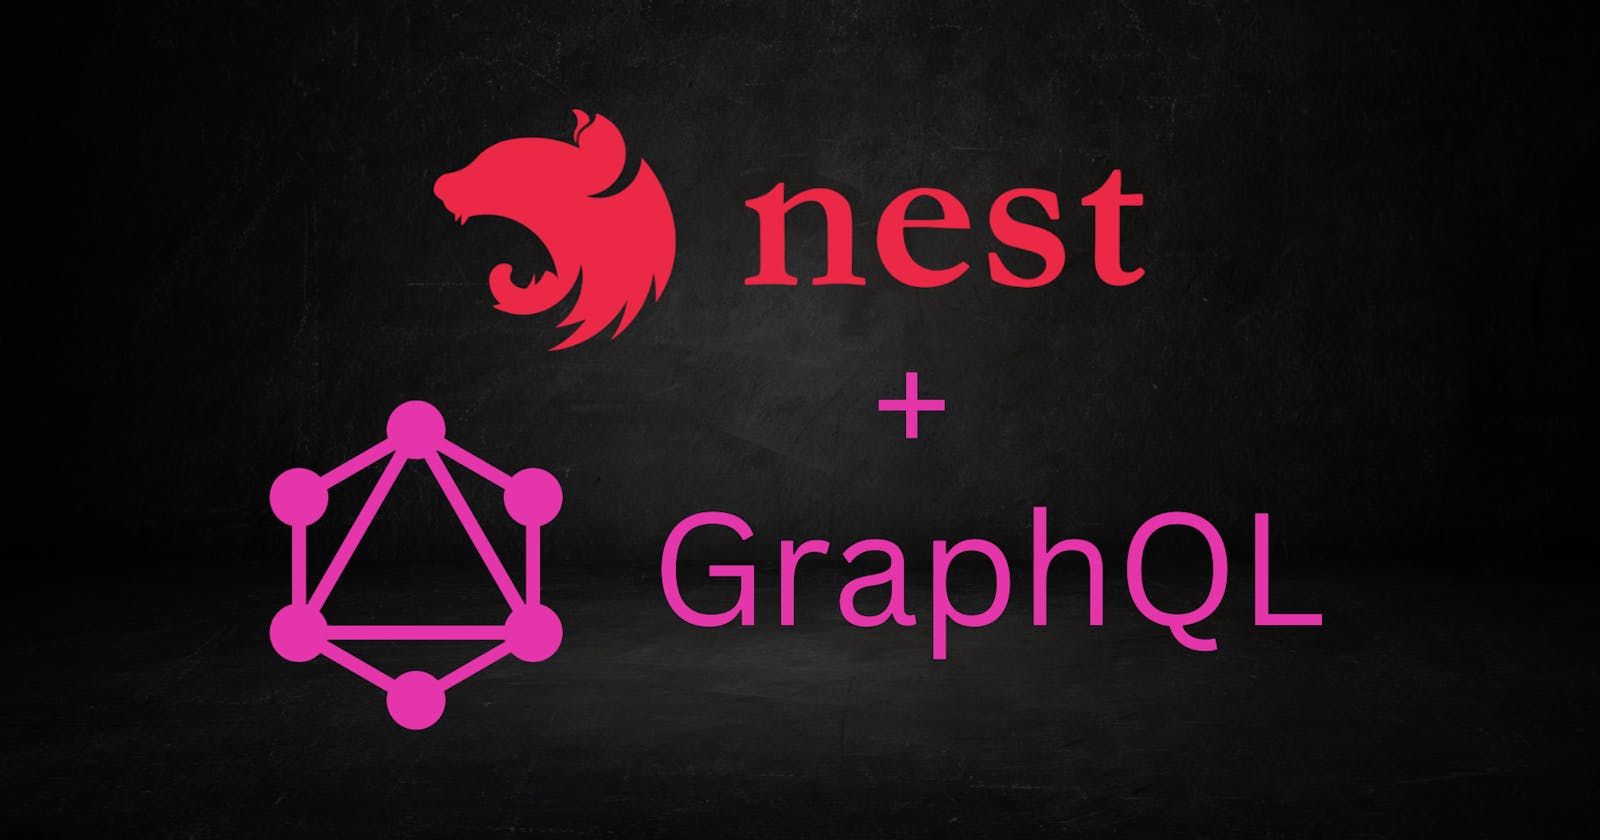 How to Create a GraphQL Server with NestJS and TypeScript?